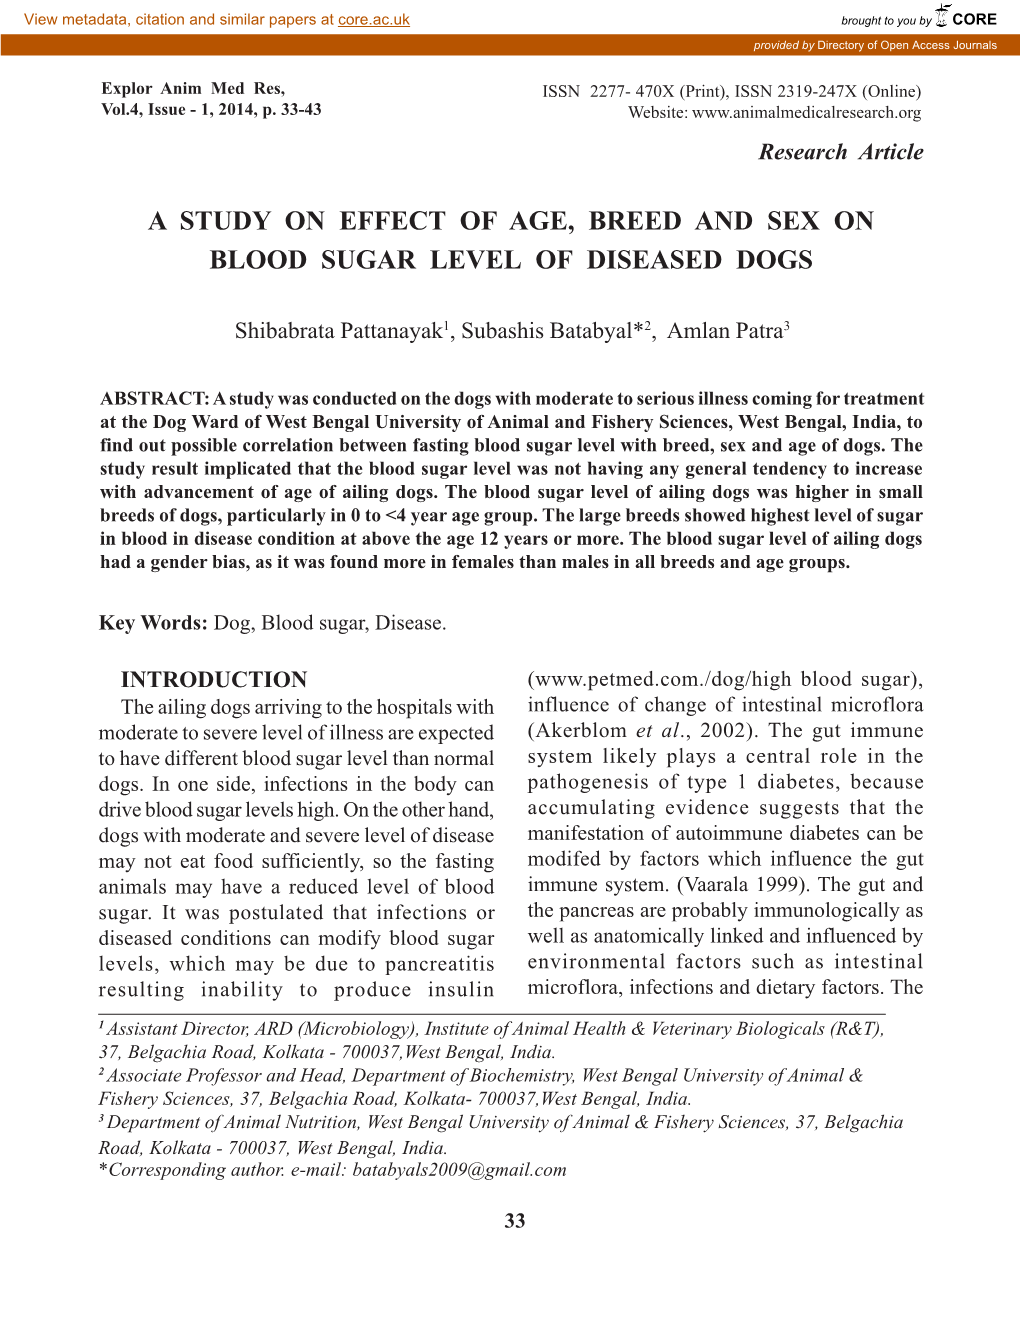 A Study on Effect of Age, Breed and Sex on Blood Sugar Level of Diseased Dogs